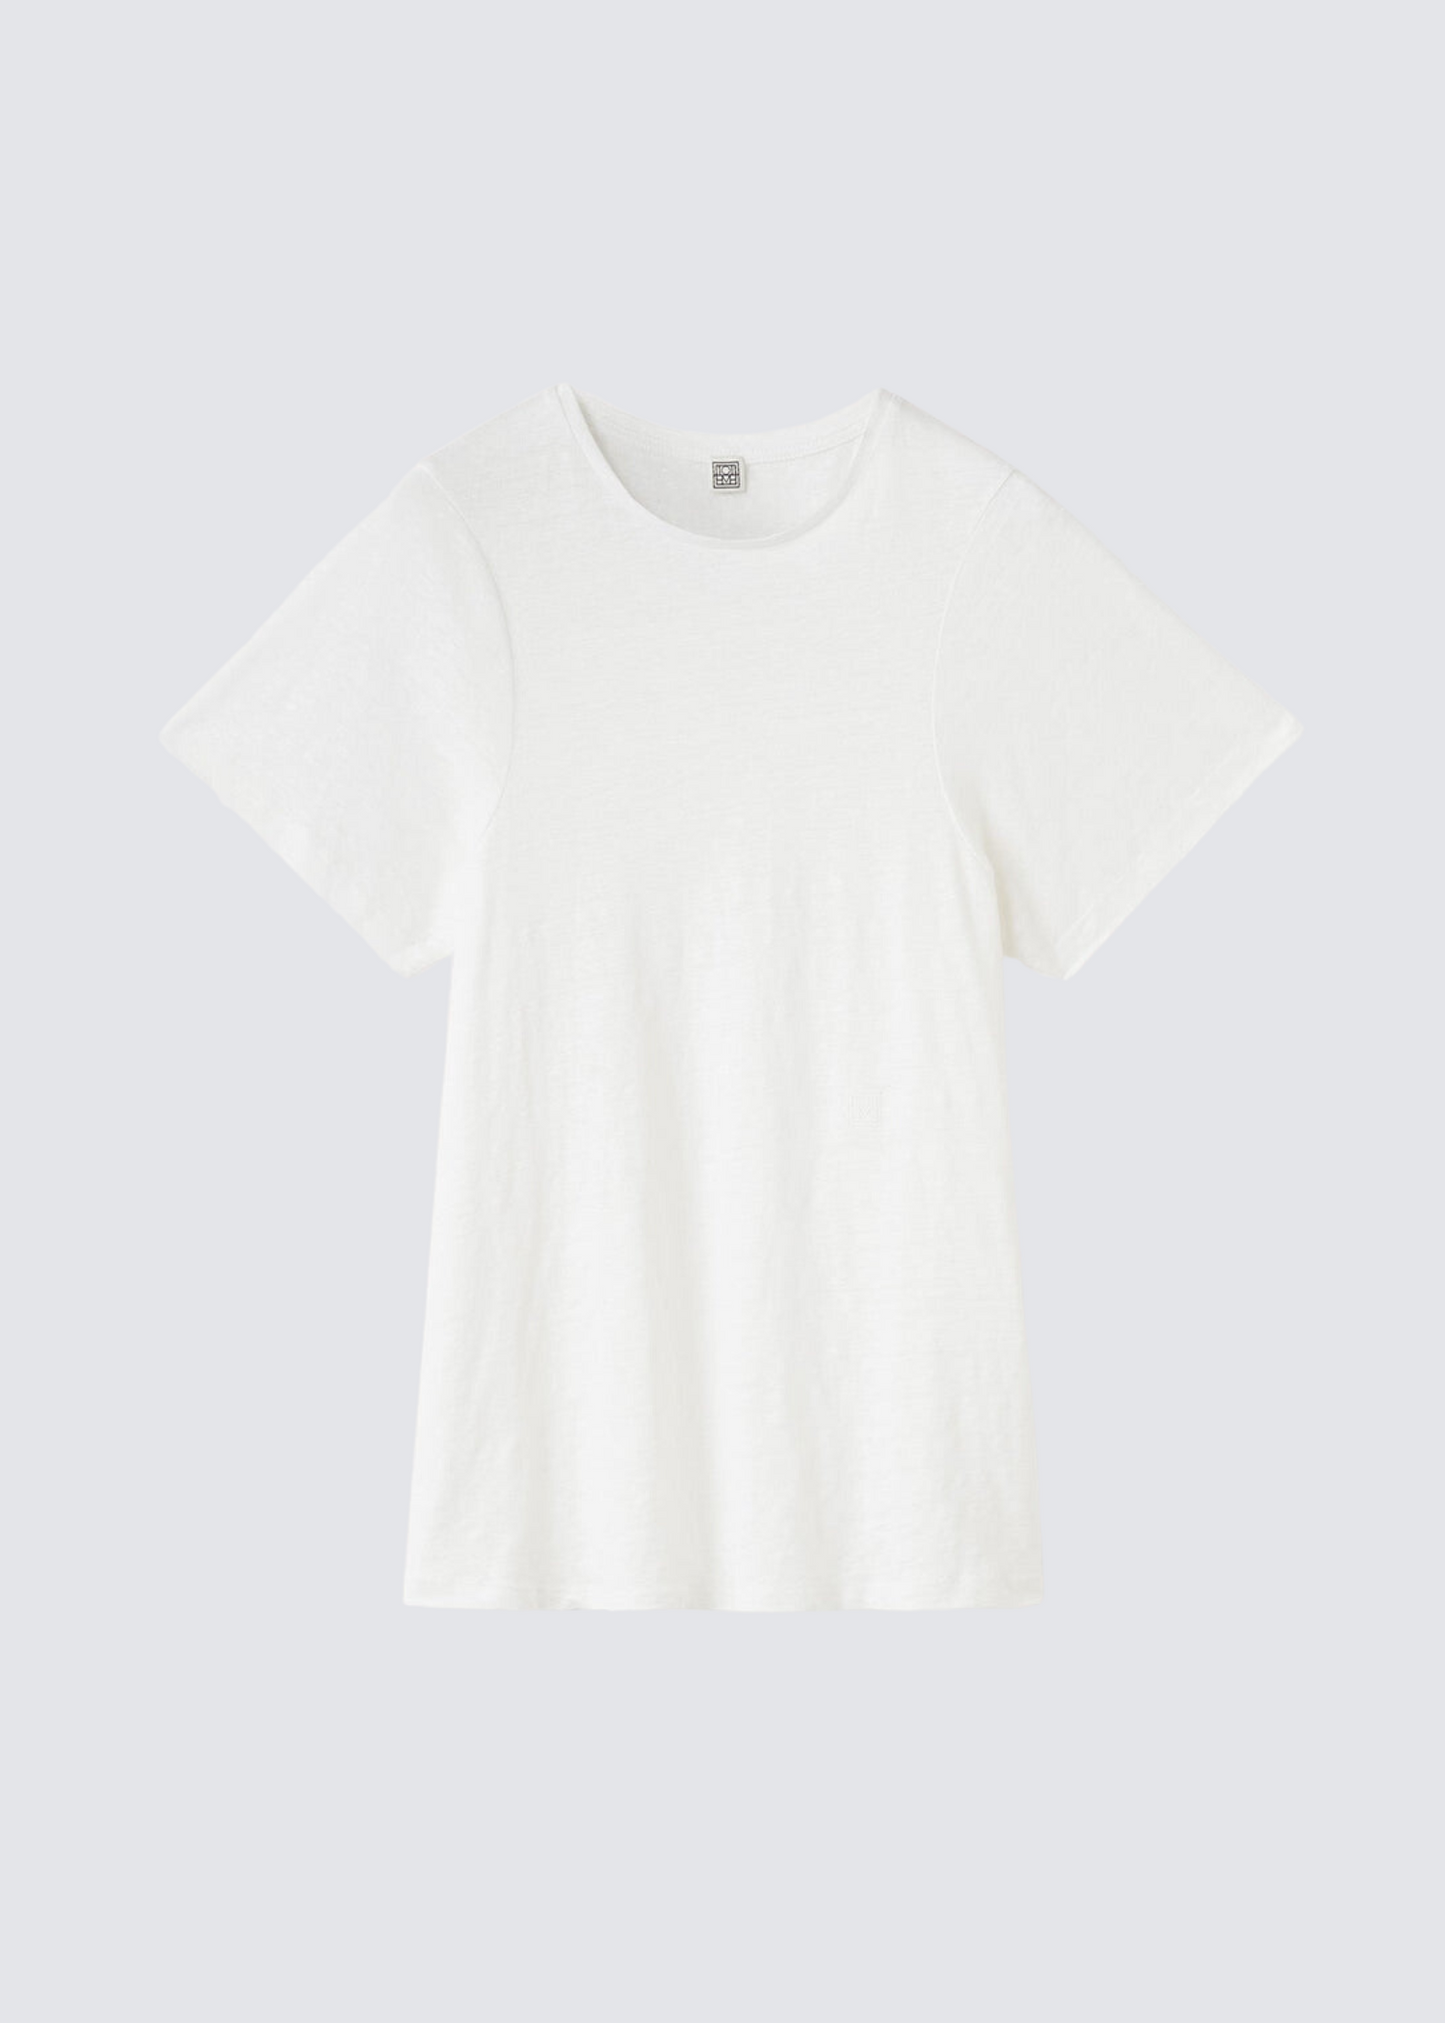 Curved, White, T-Shirt